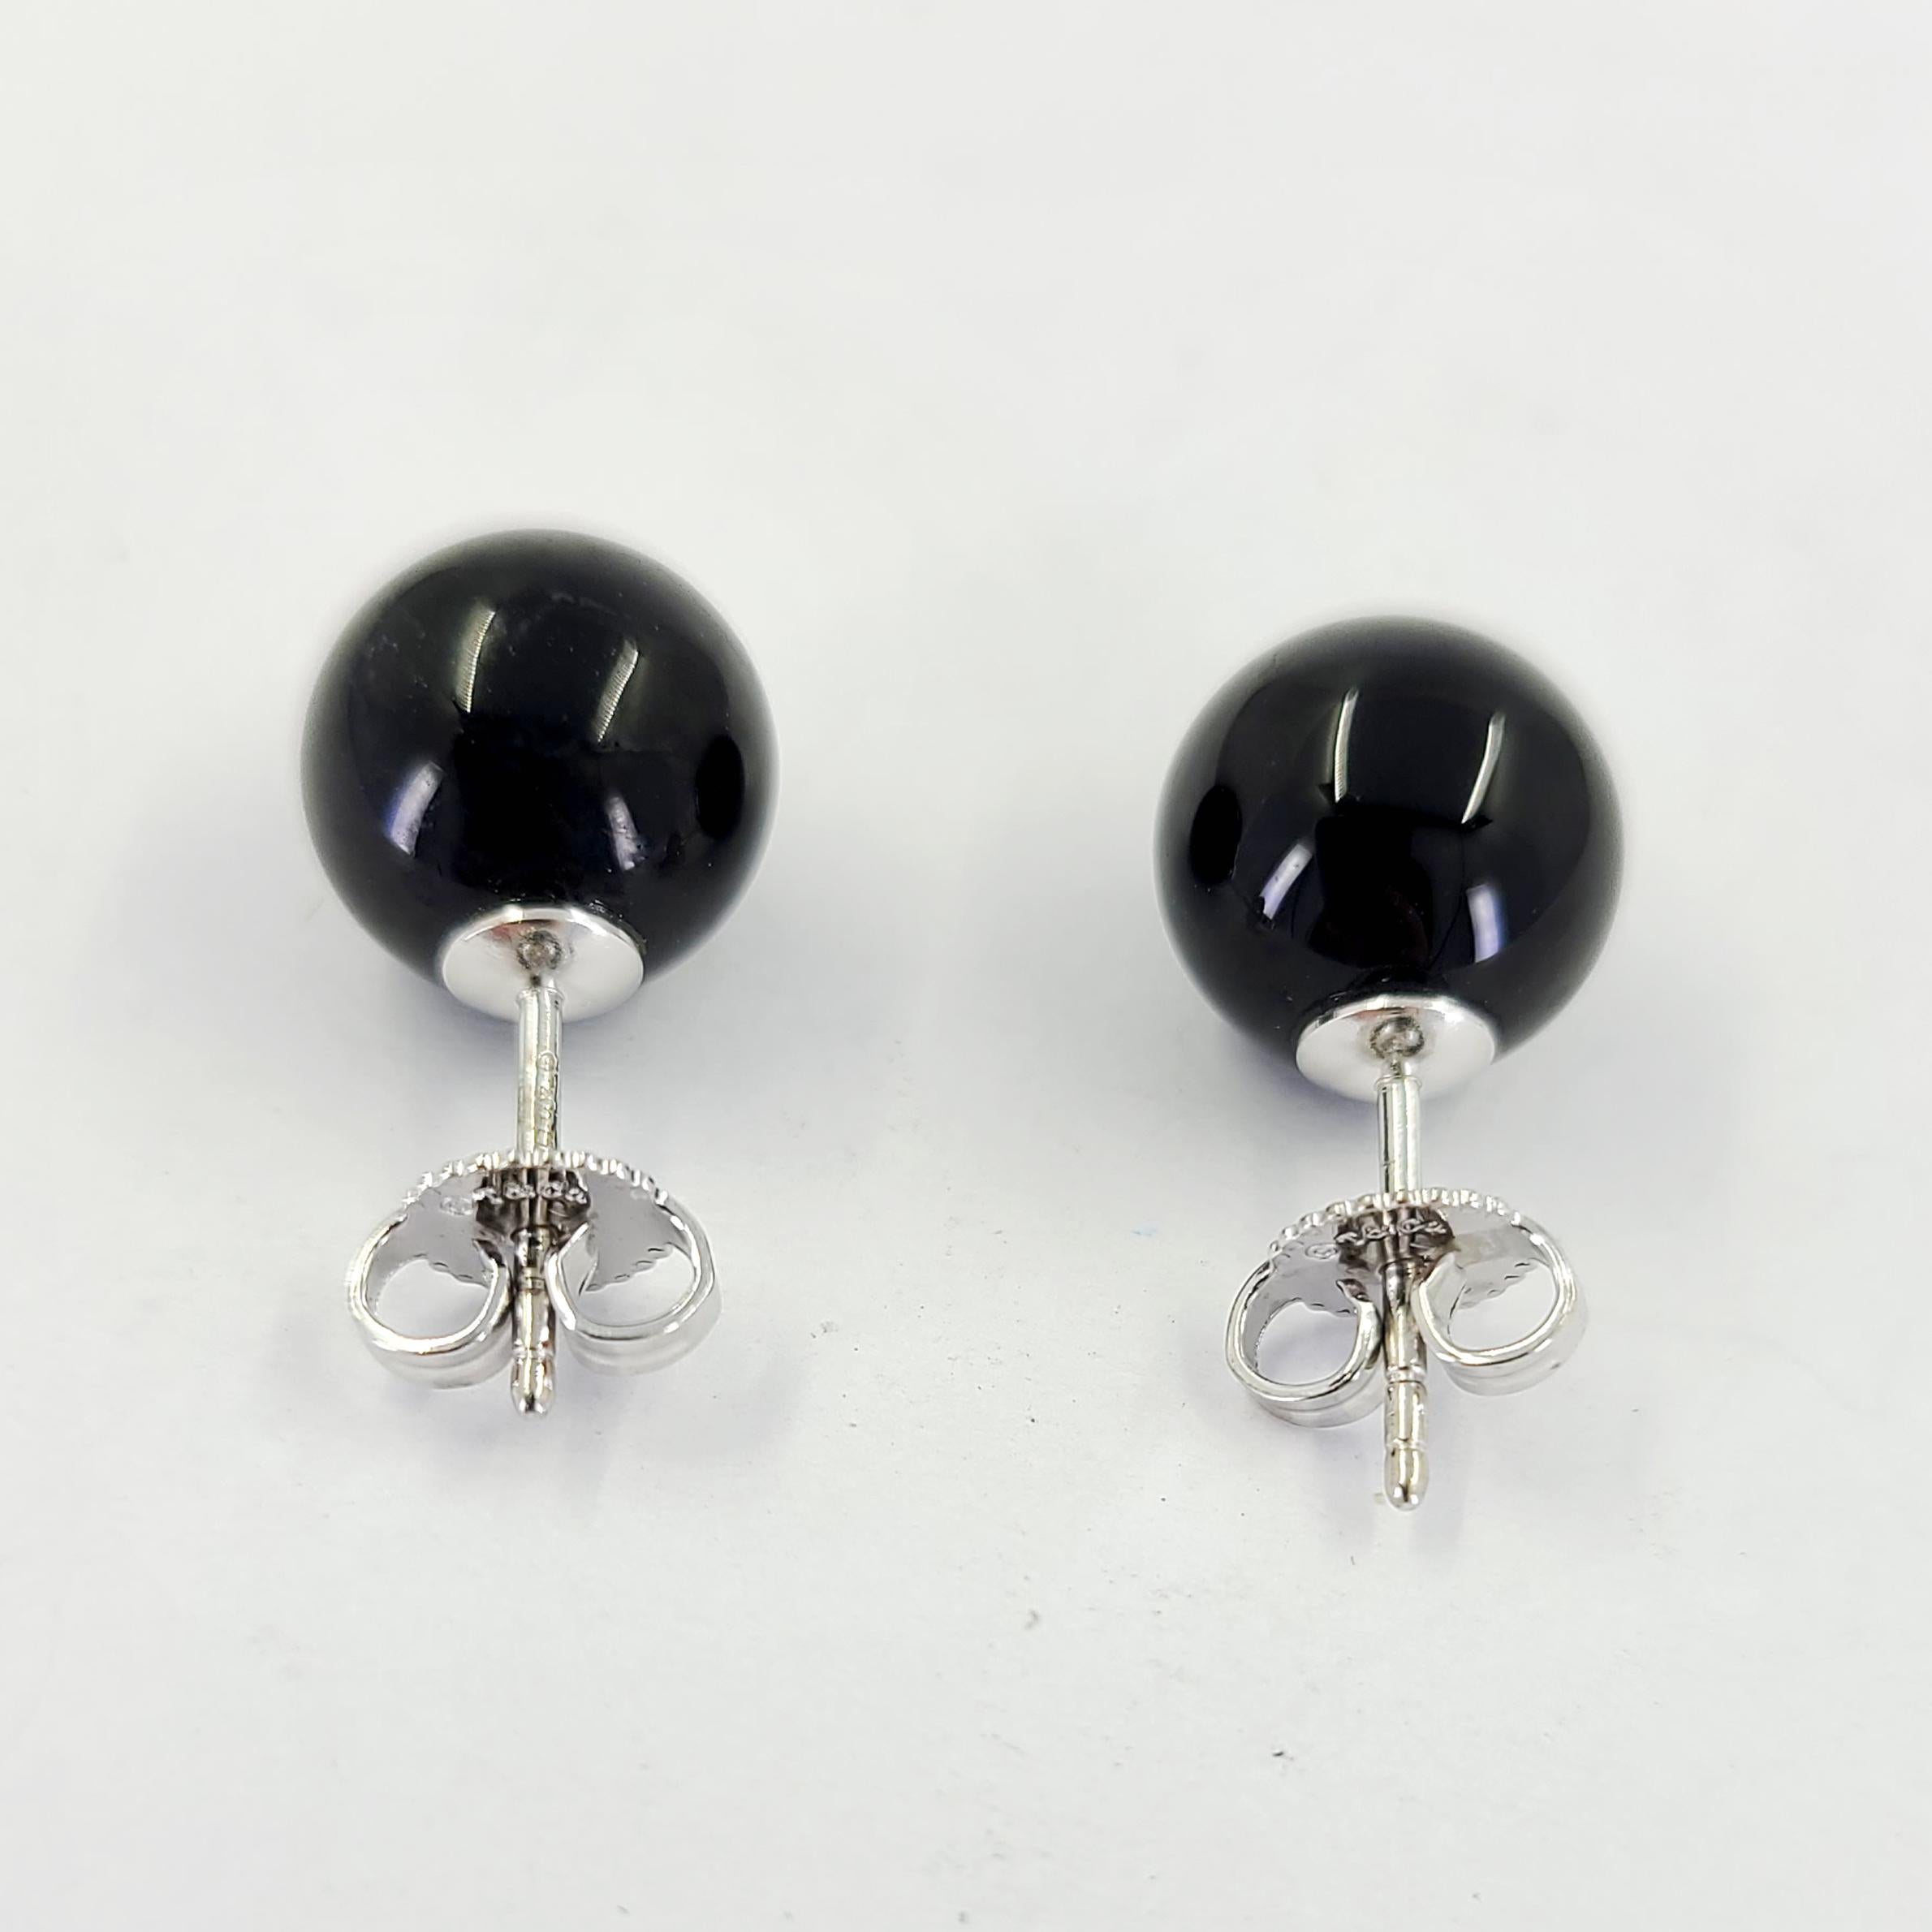 Estate Tiffany & Co. 18 Karat White Gold 10mm Round Onyx Stud Earrings. Pierced Post With Friction Back. MSRP $385